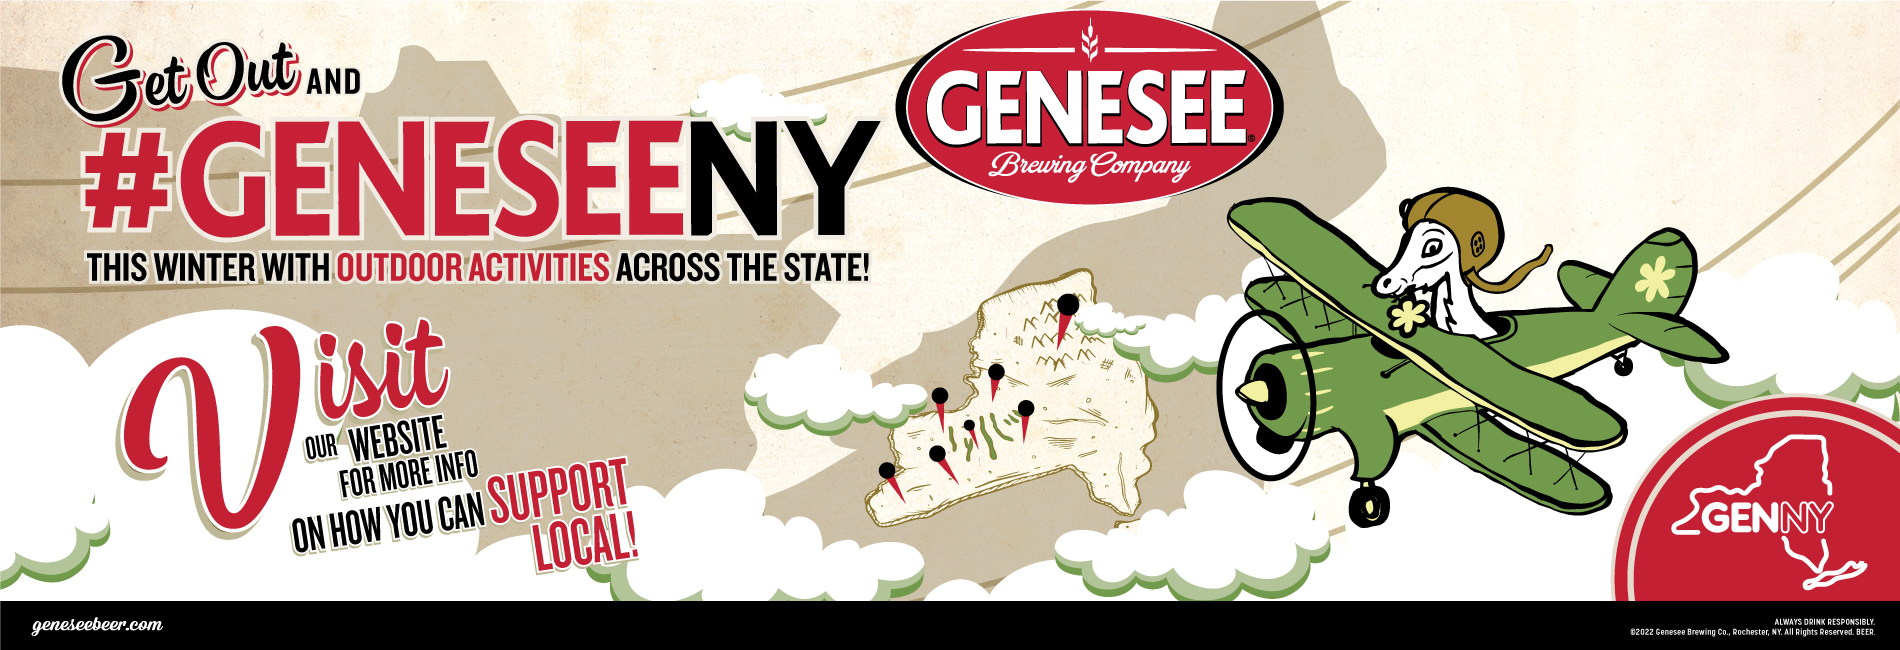 Image depicts the Springbock goat flying an airplane with a map of New York state in the background. Text reads- Get out and hastag GeneseeNY this winter with outdoor activities across the state! Visit our webpage for more info on how you can support local! Genesee Brewing Company.